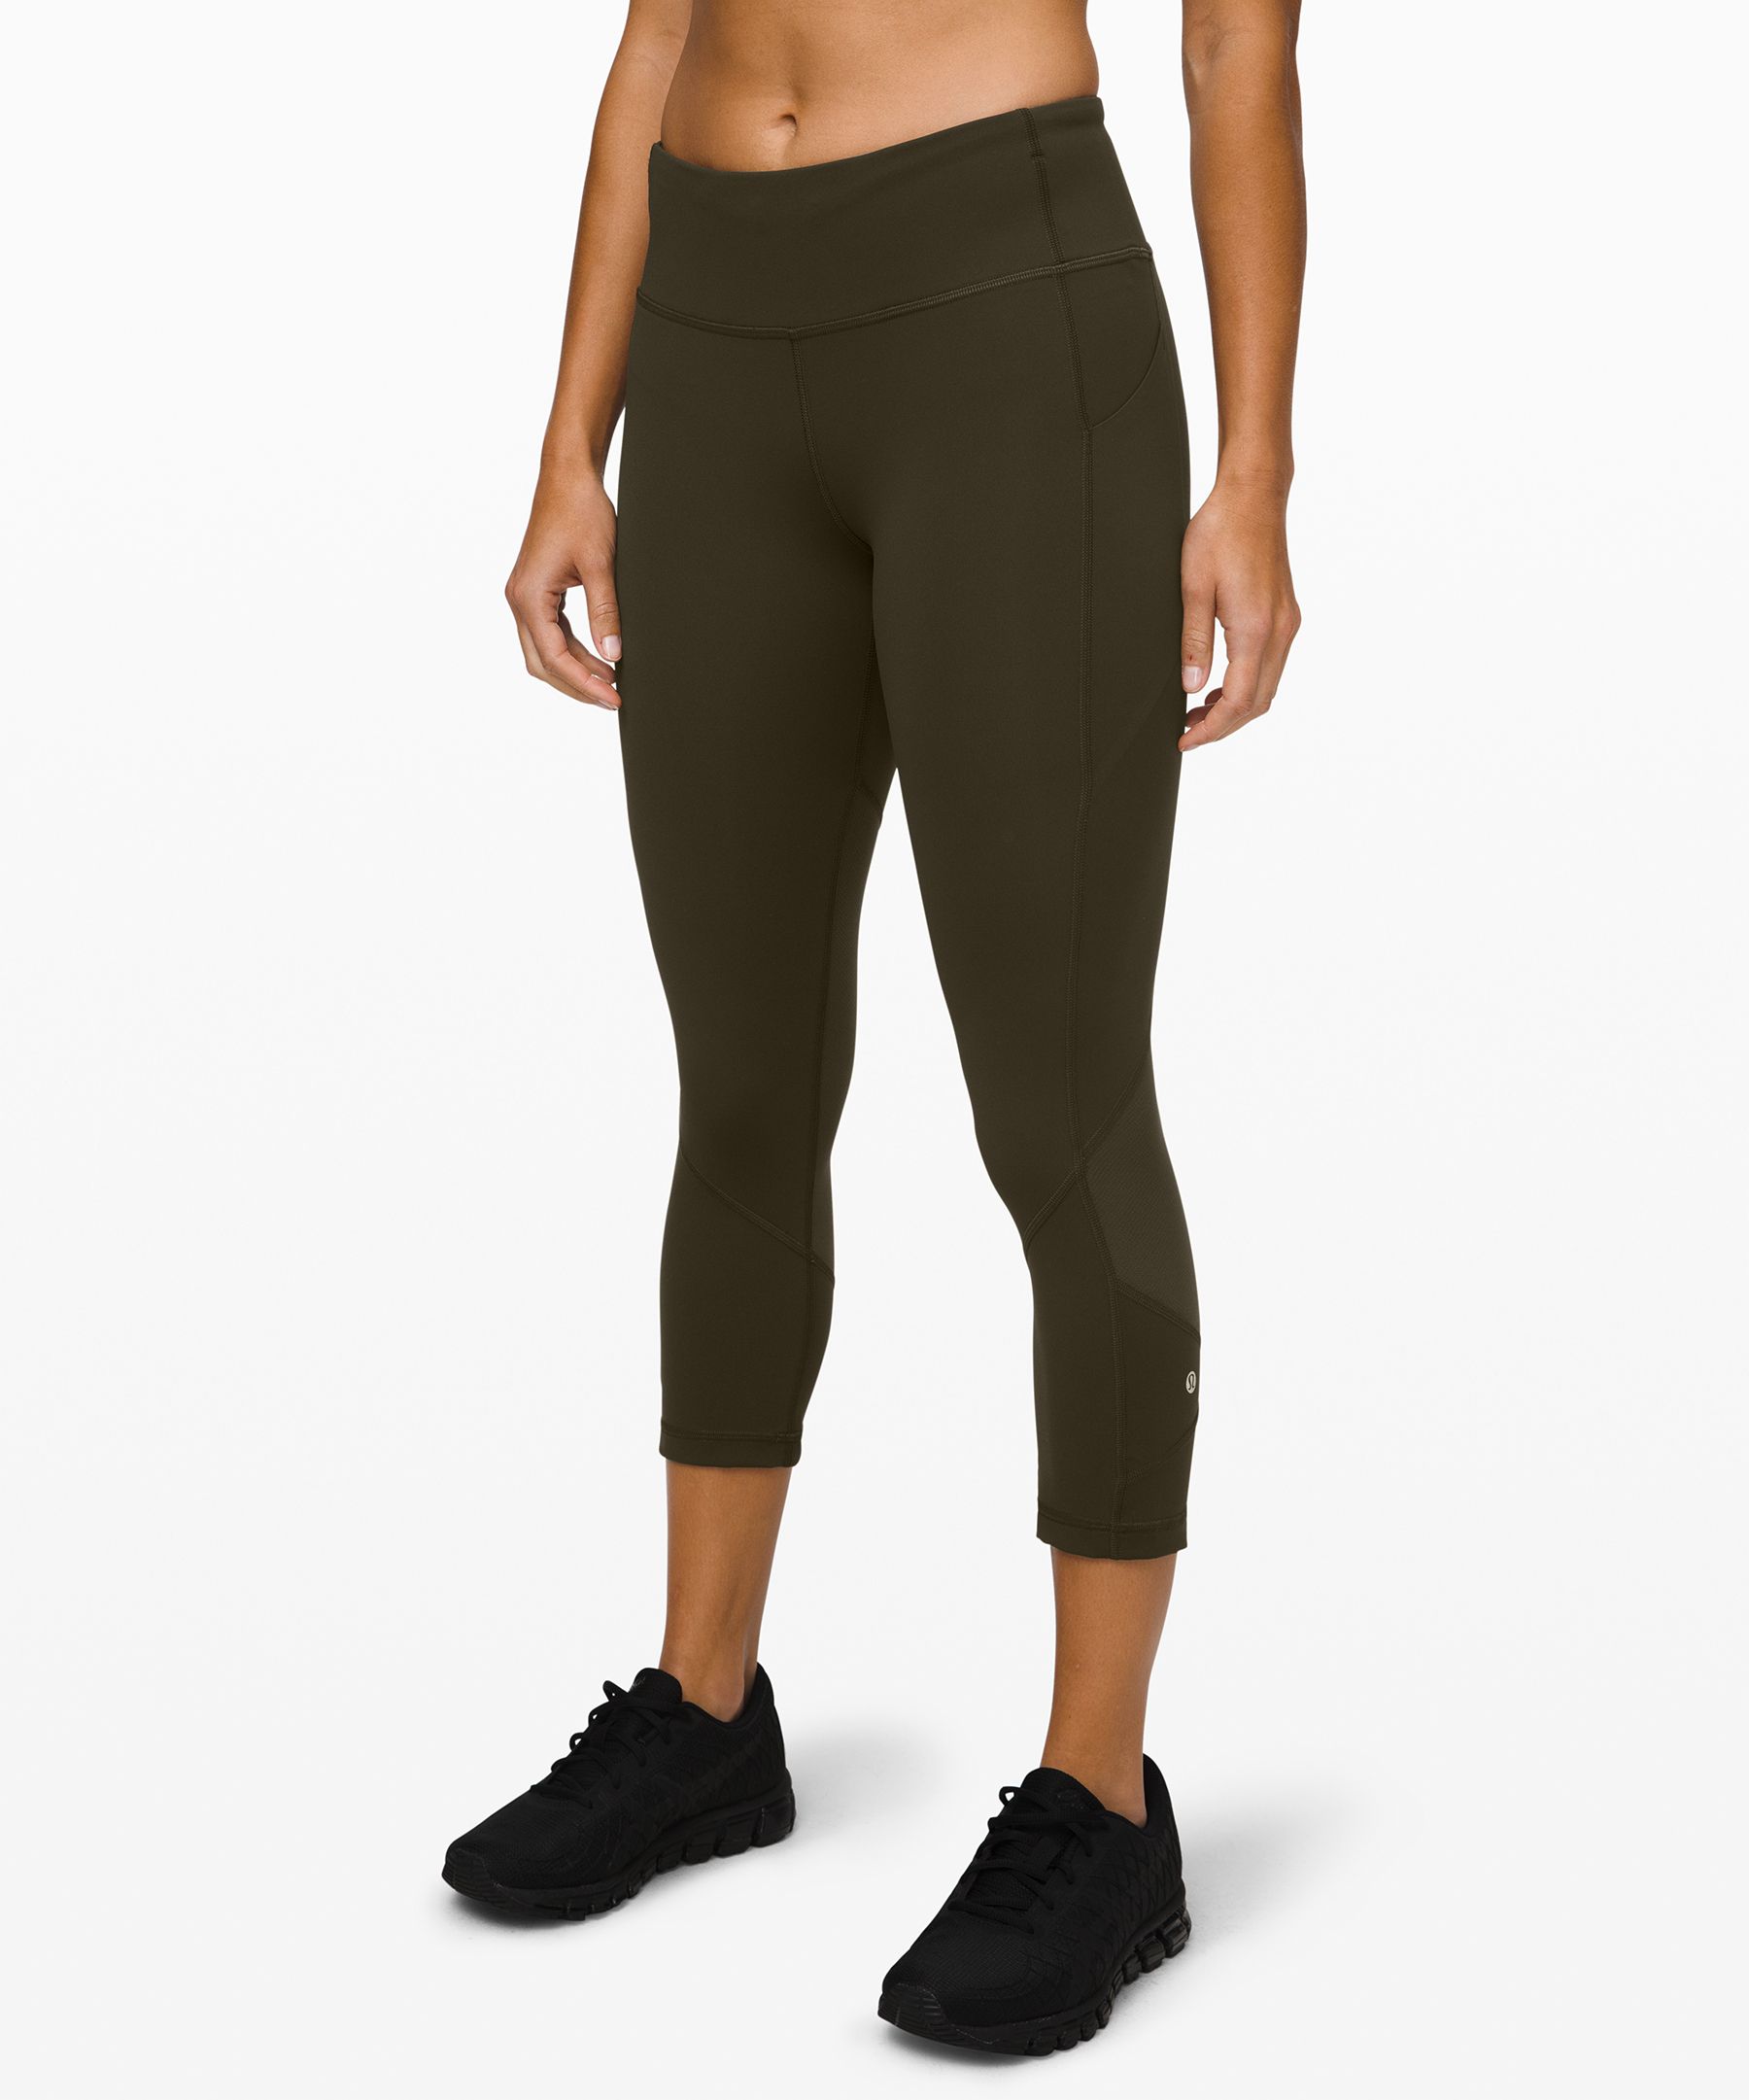 Lululemon Pace Rival Mid-rise Crop 22” In Dark Olive